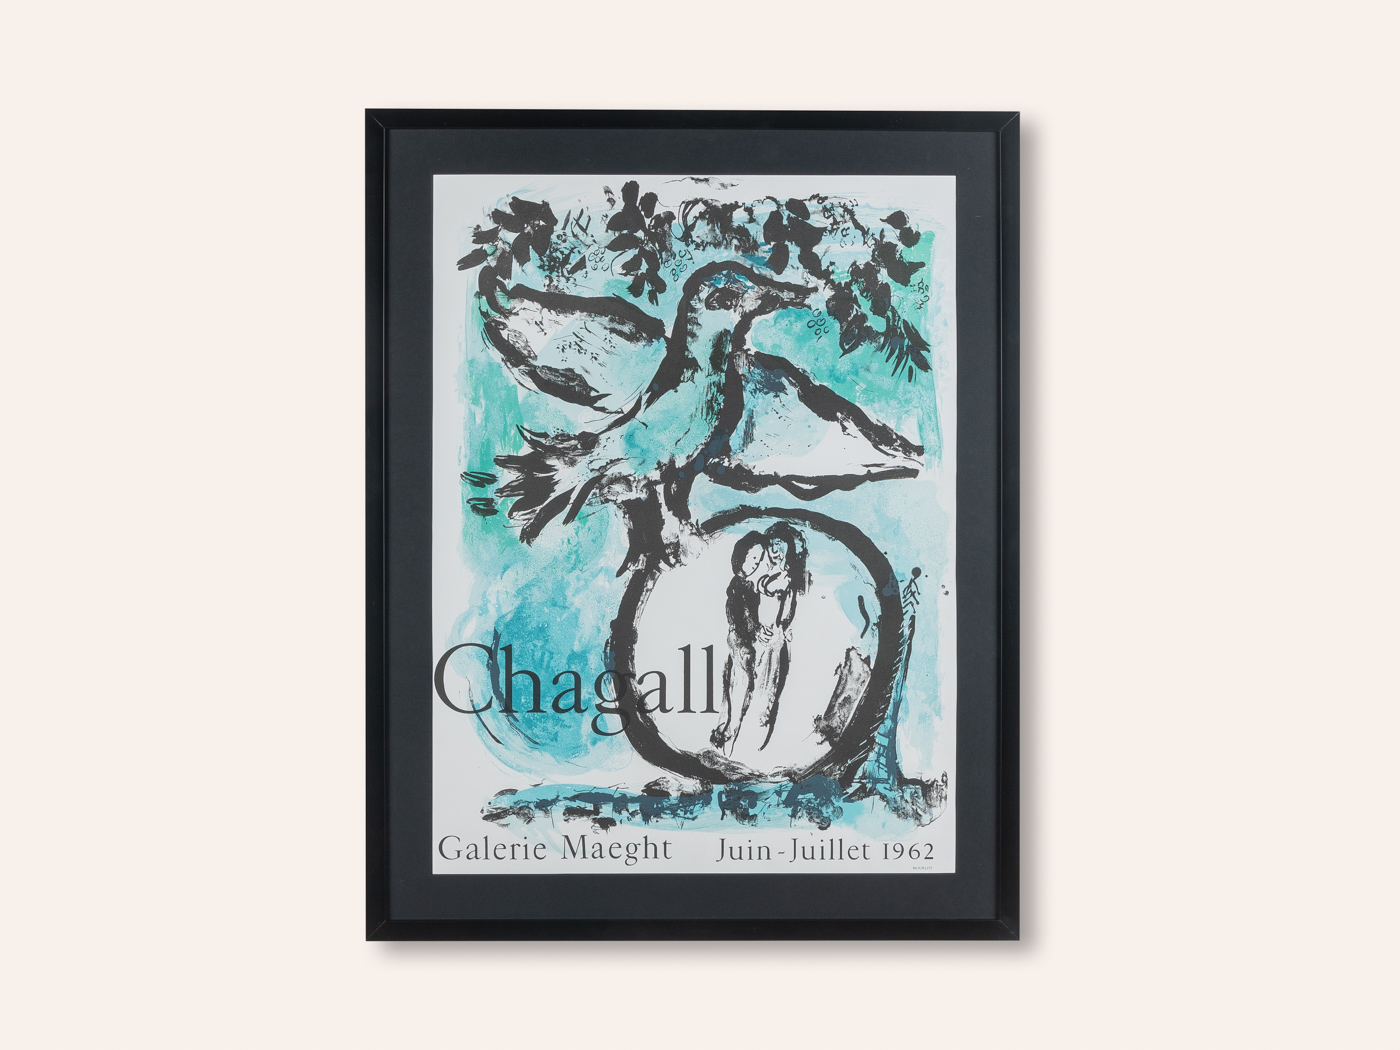 Chagall, Lithographic Exhibition Poster, 65 x 82 cm 